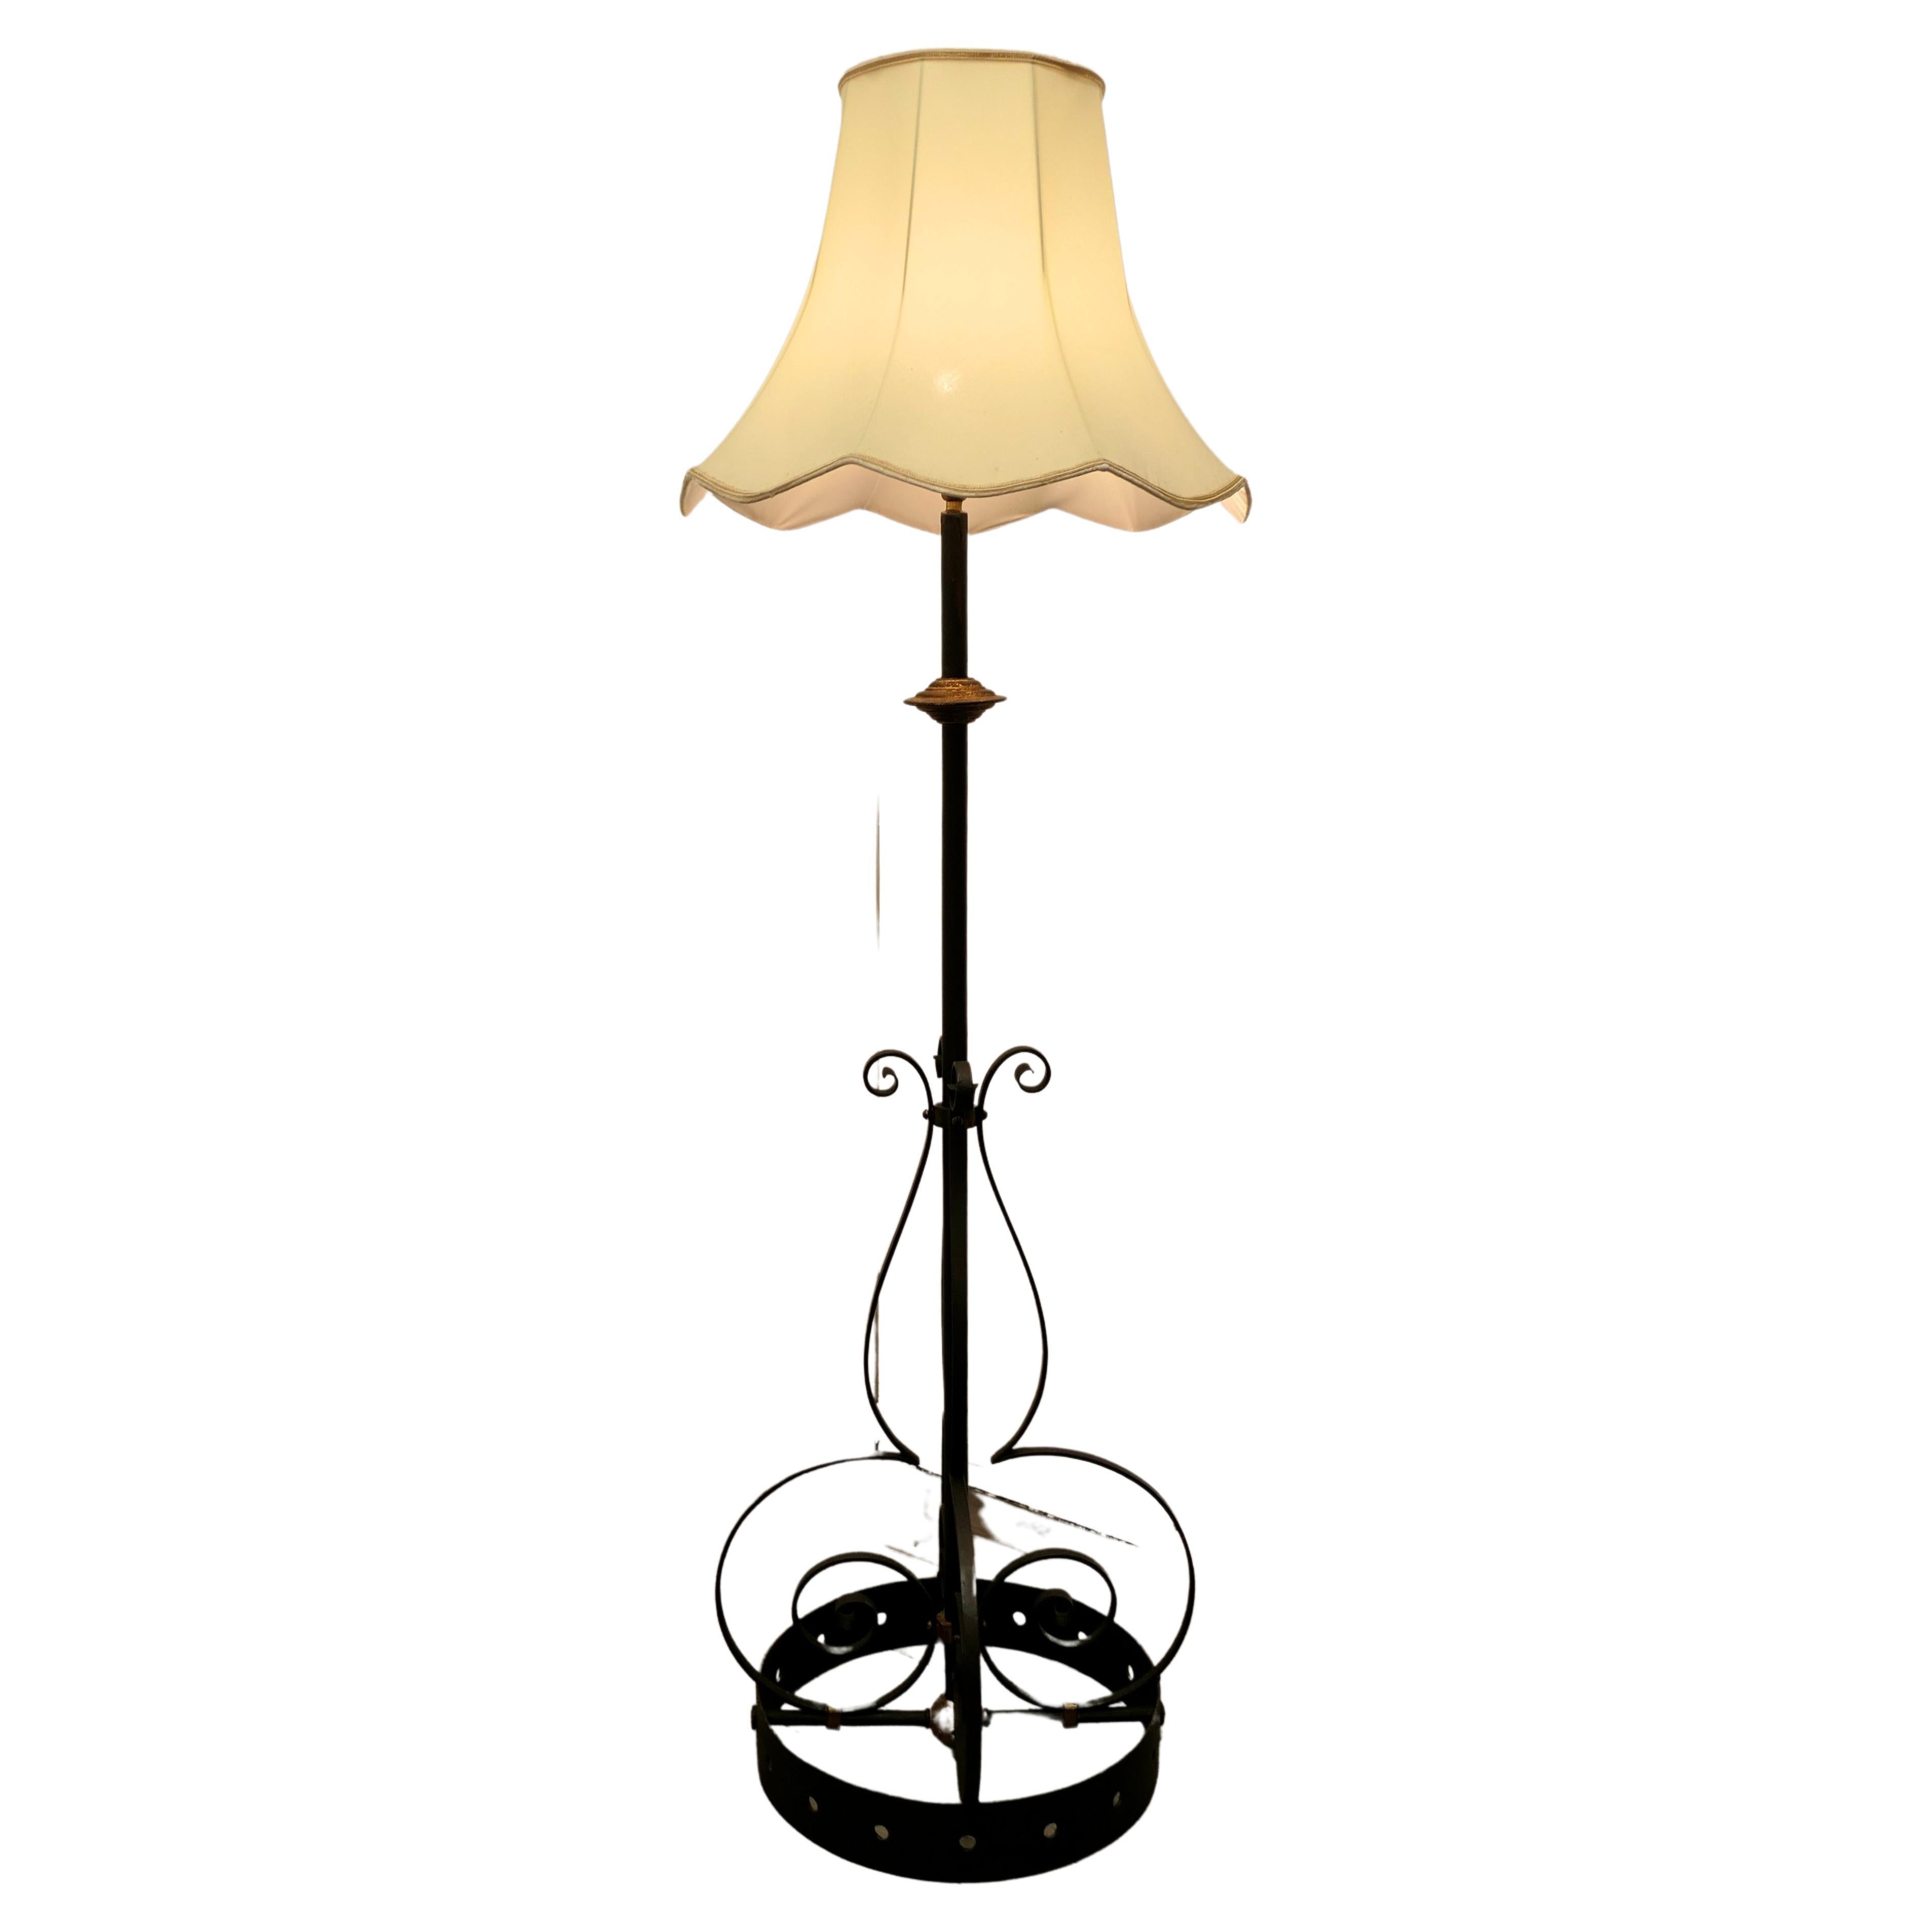 Wrought Iron Floor Lamp in the Arts and Crafts Gothic Style